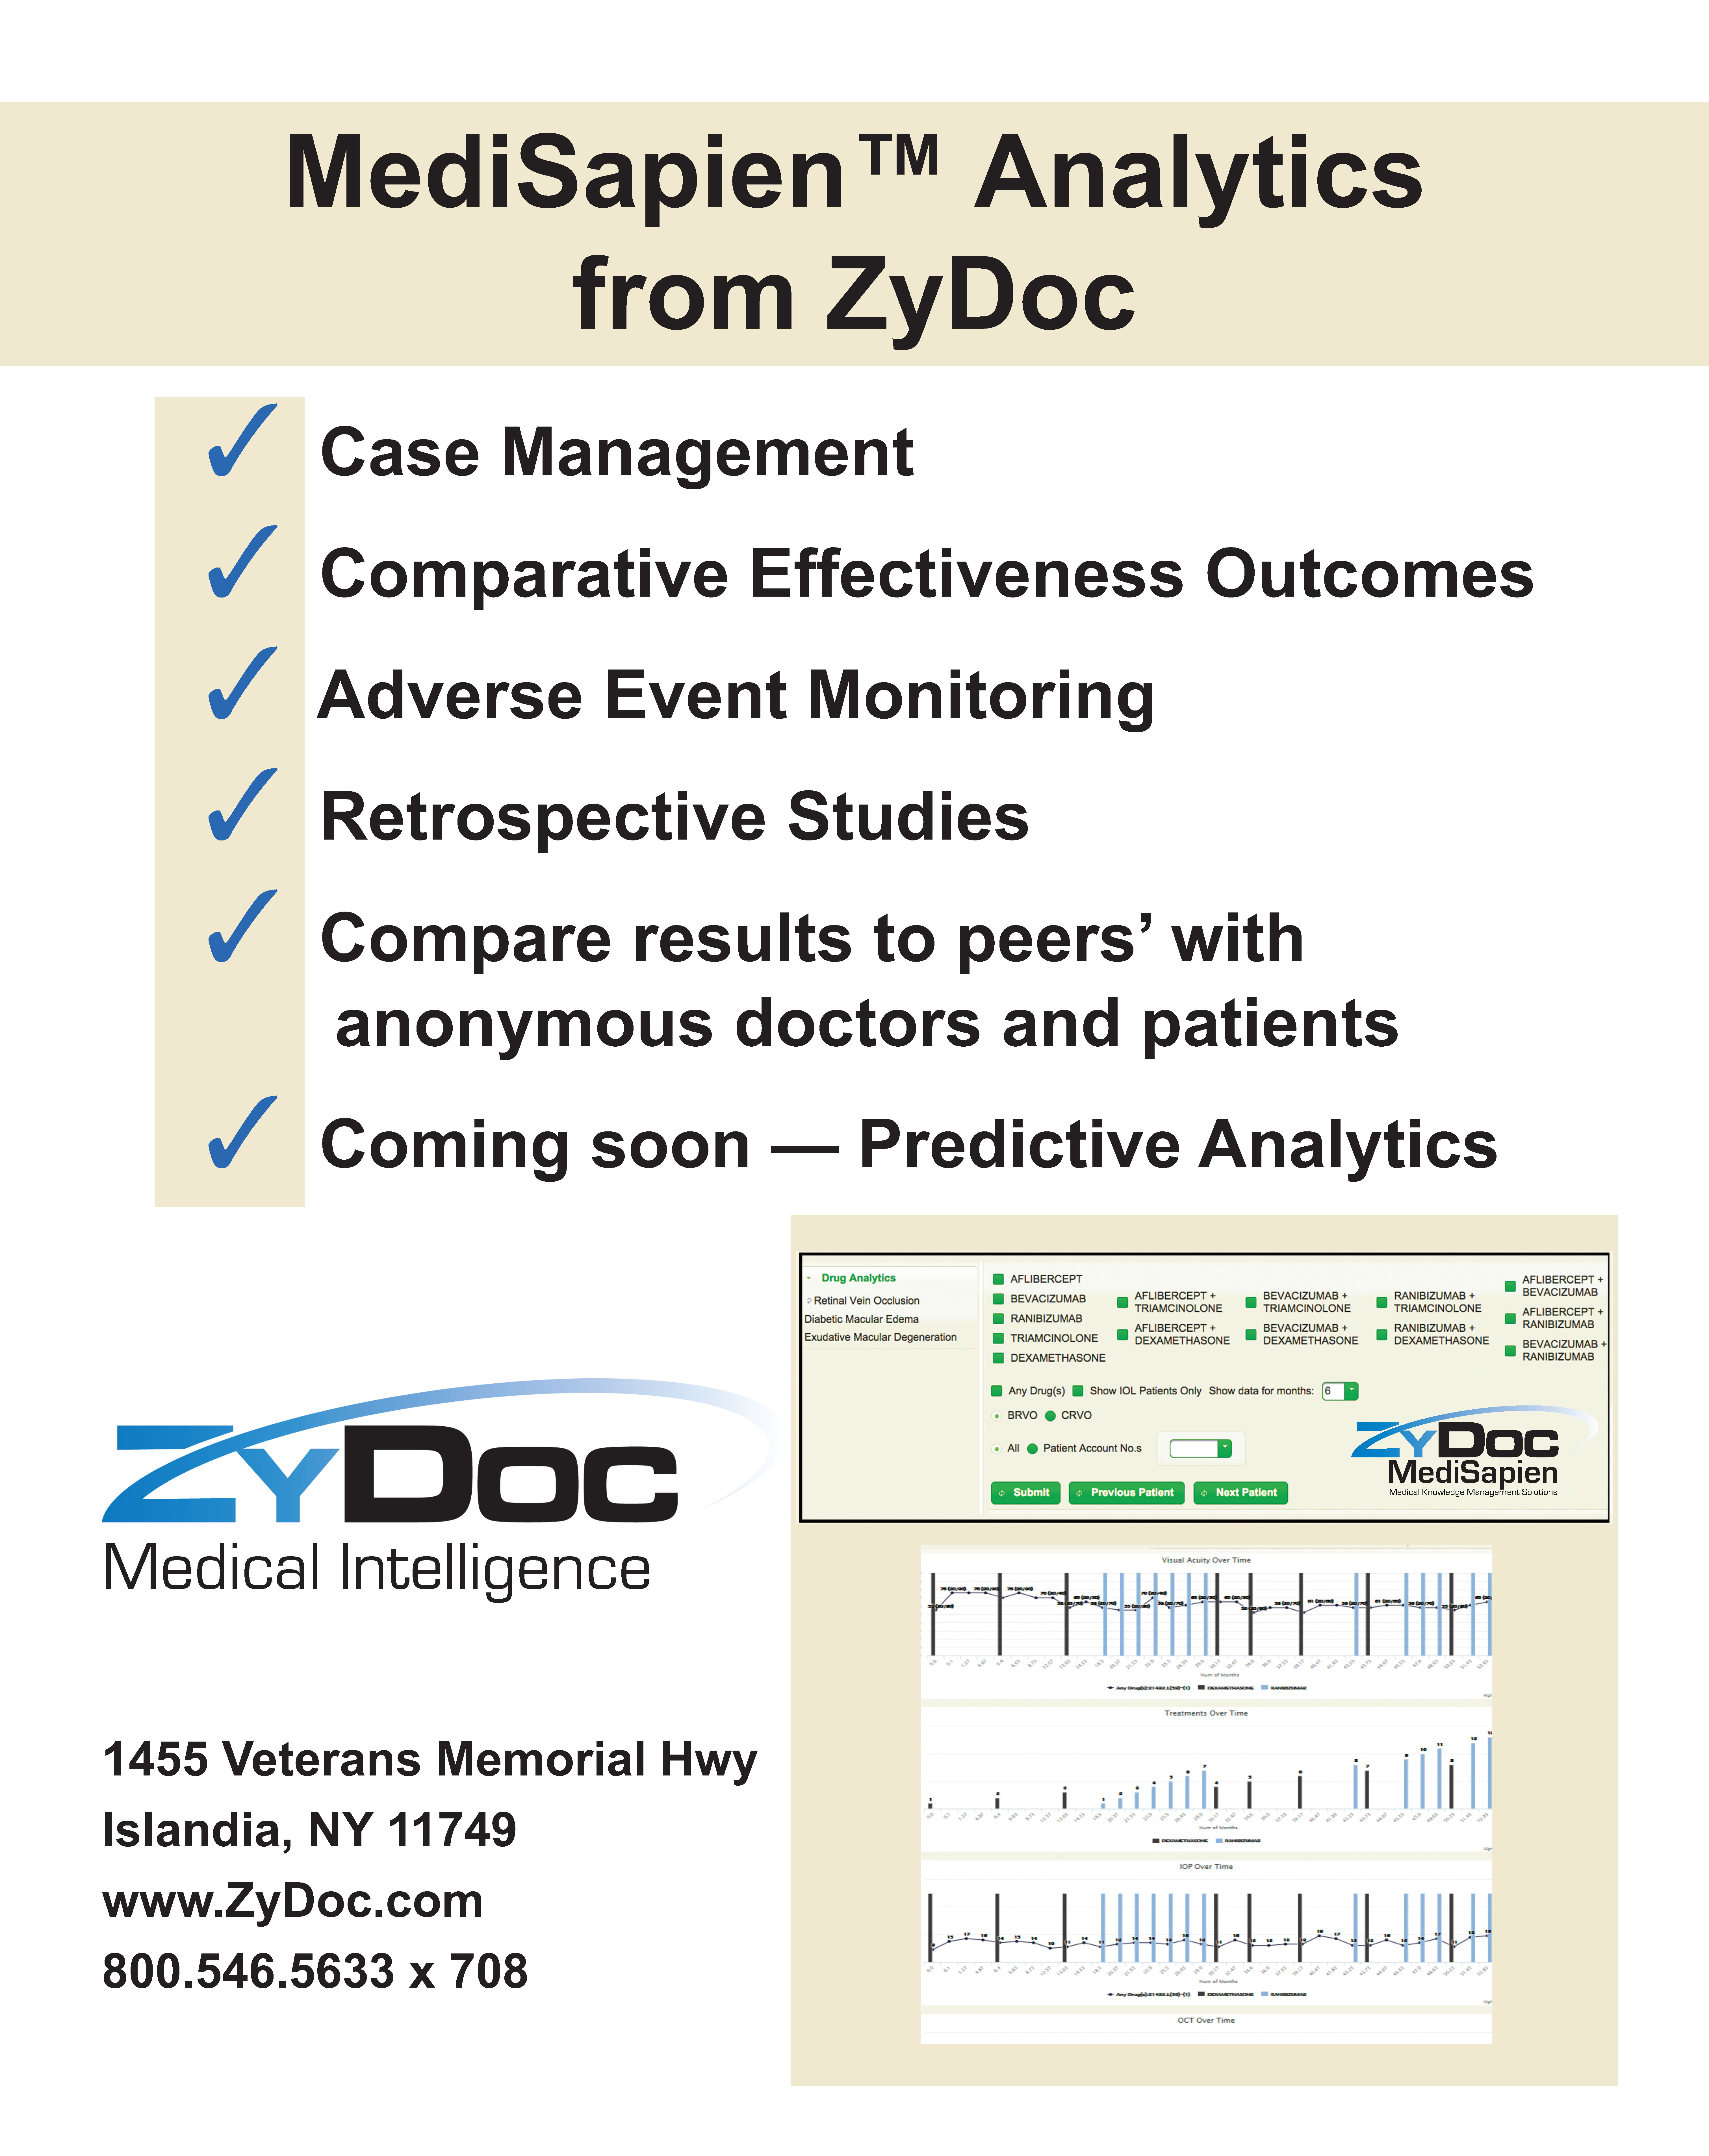 The ZyDoc MediSapien Platform allows assembly of clinical cases for individual or population based analysis. RWD (Real-World Data) can be quite different from RCT (Randomized Controlled Trials).